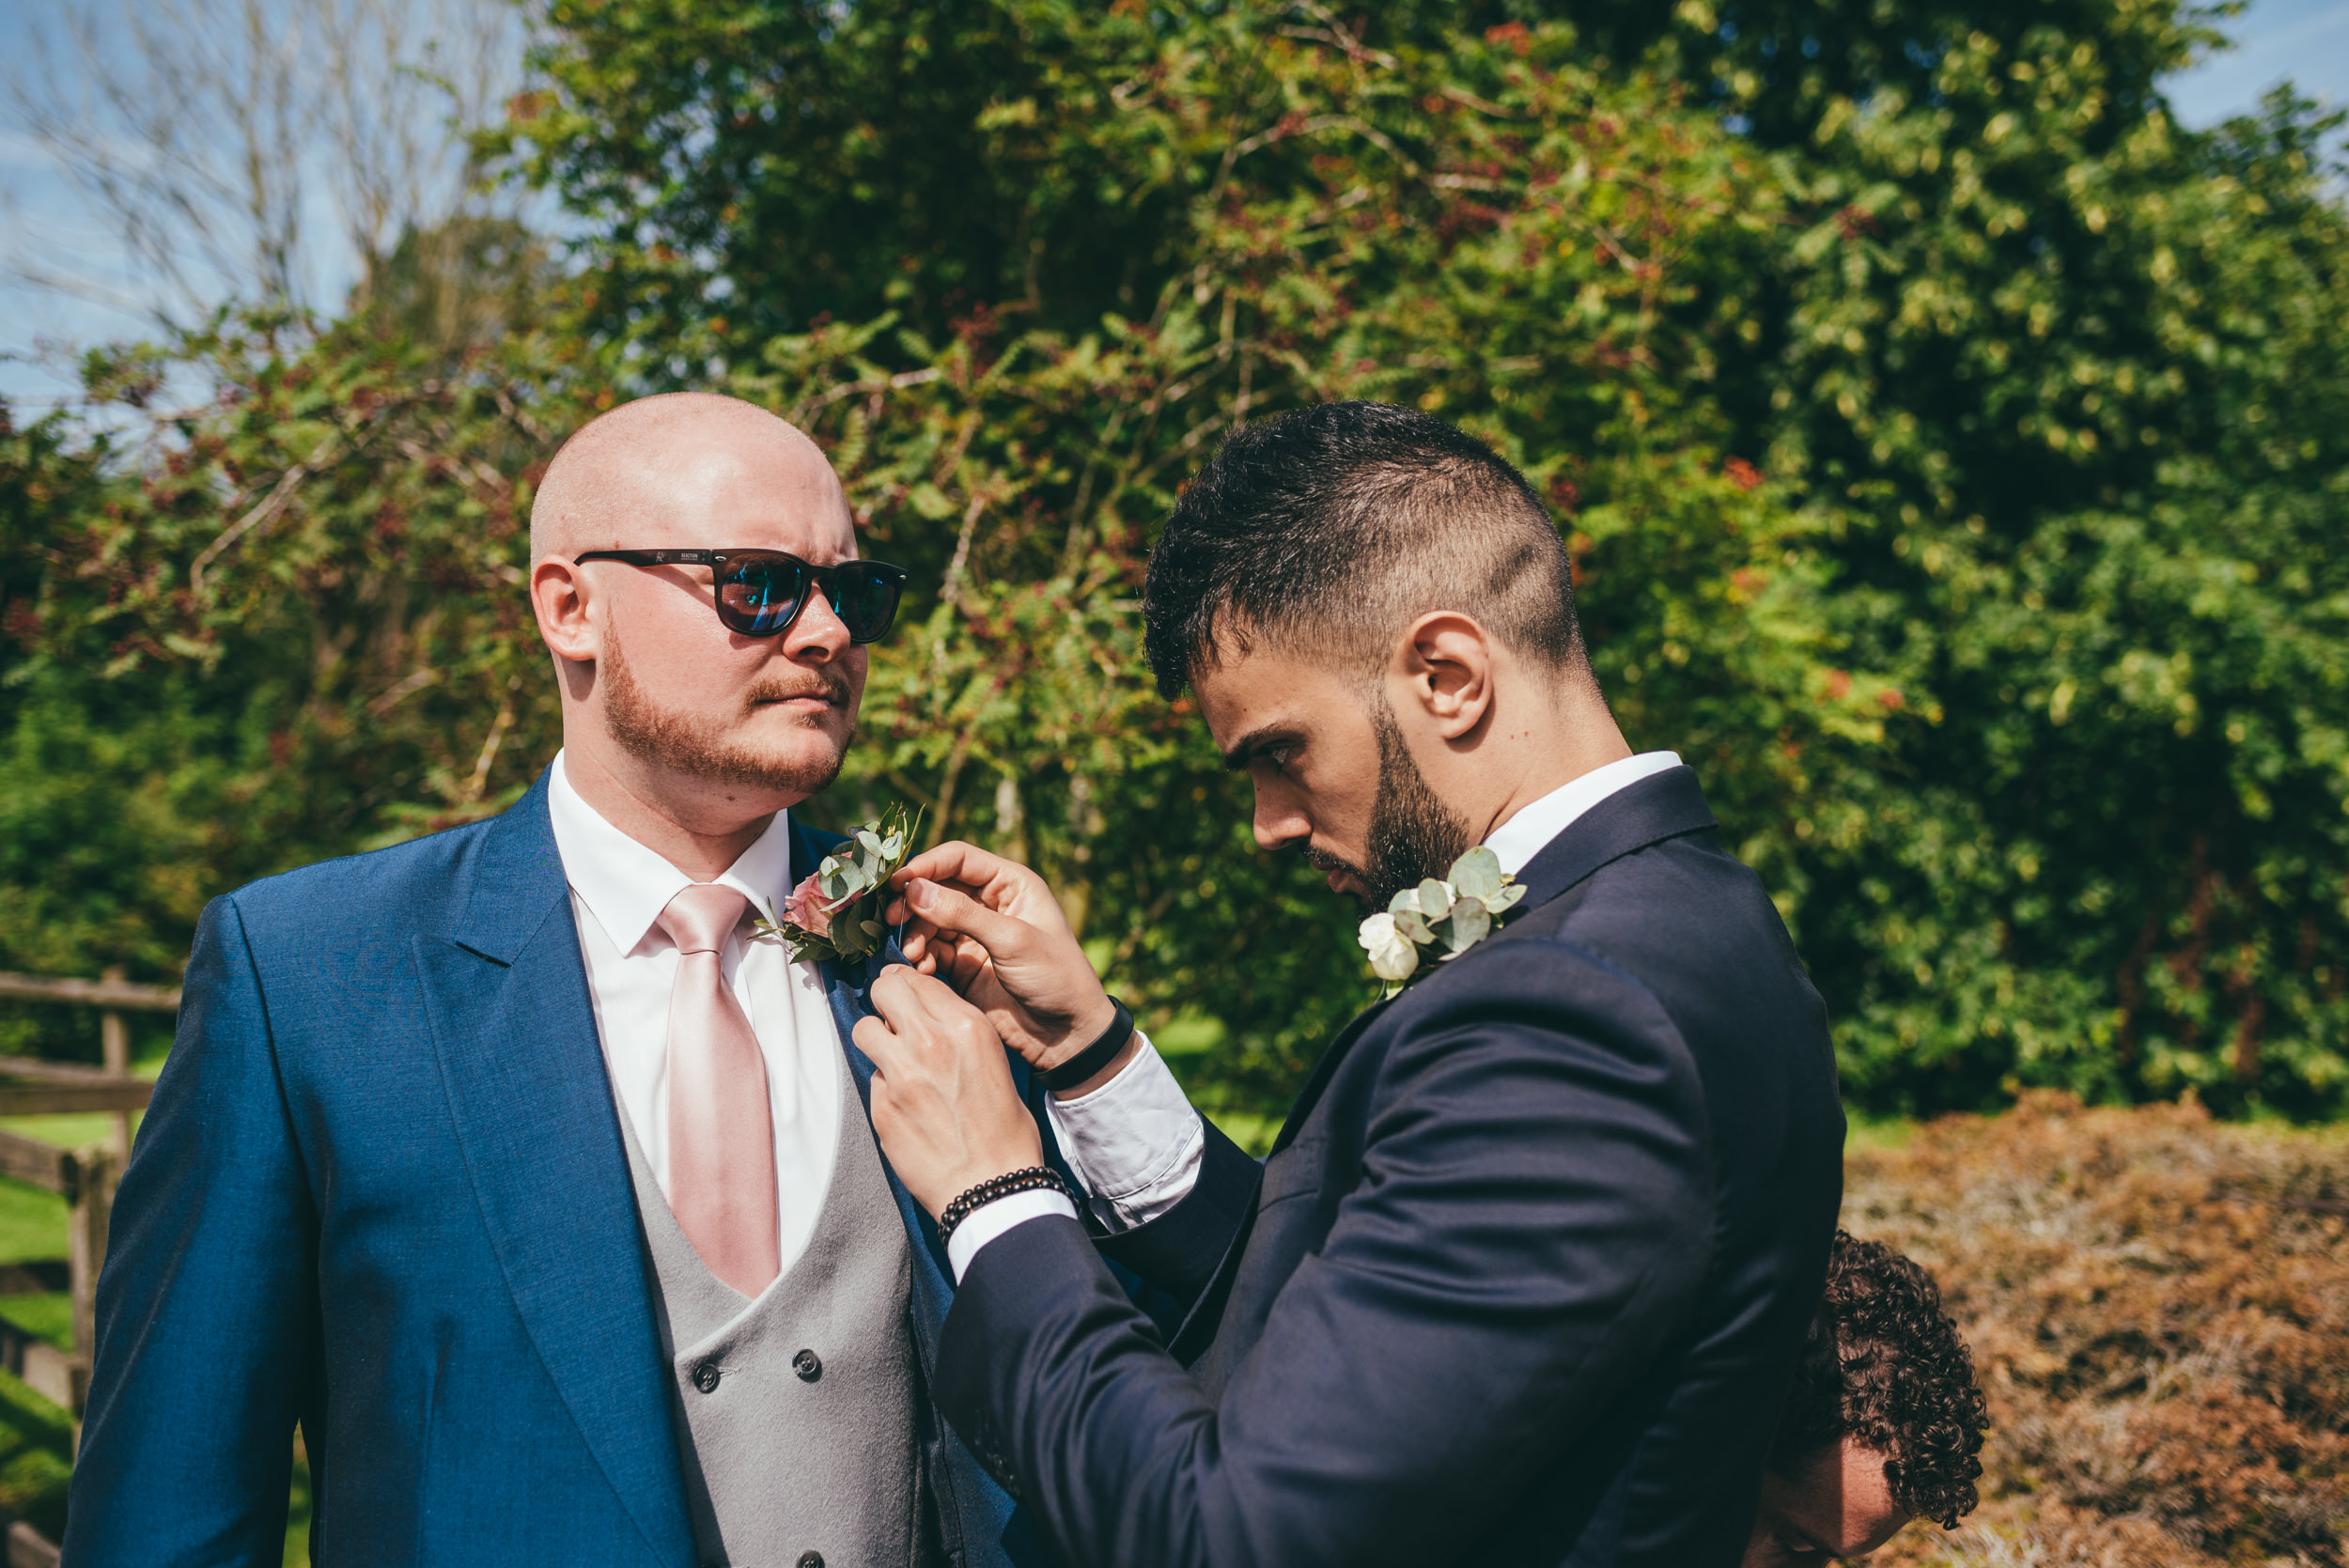 groom having his buttonhole flower put in